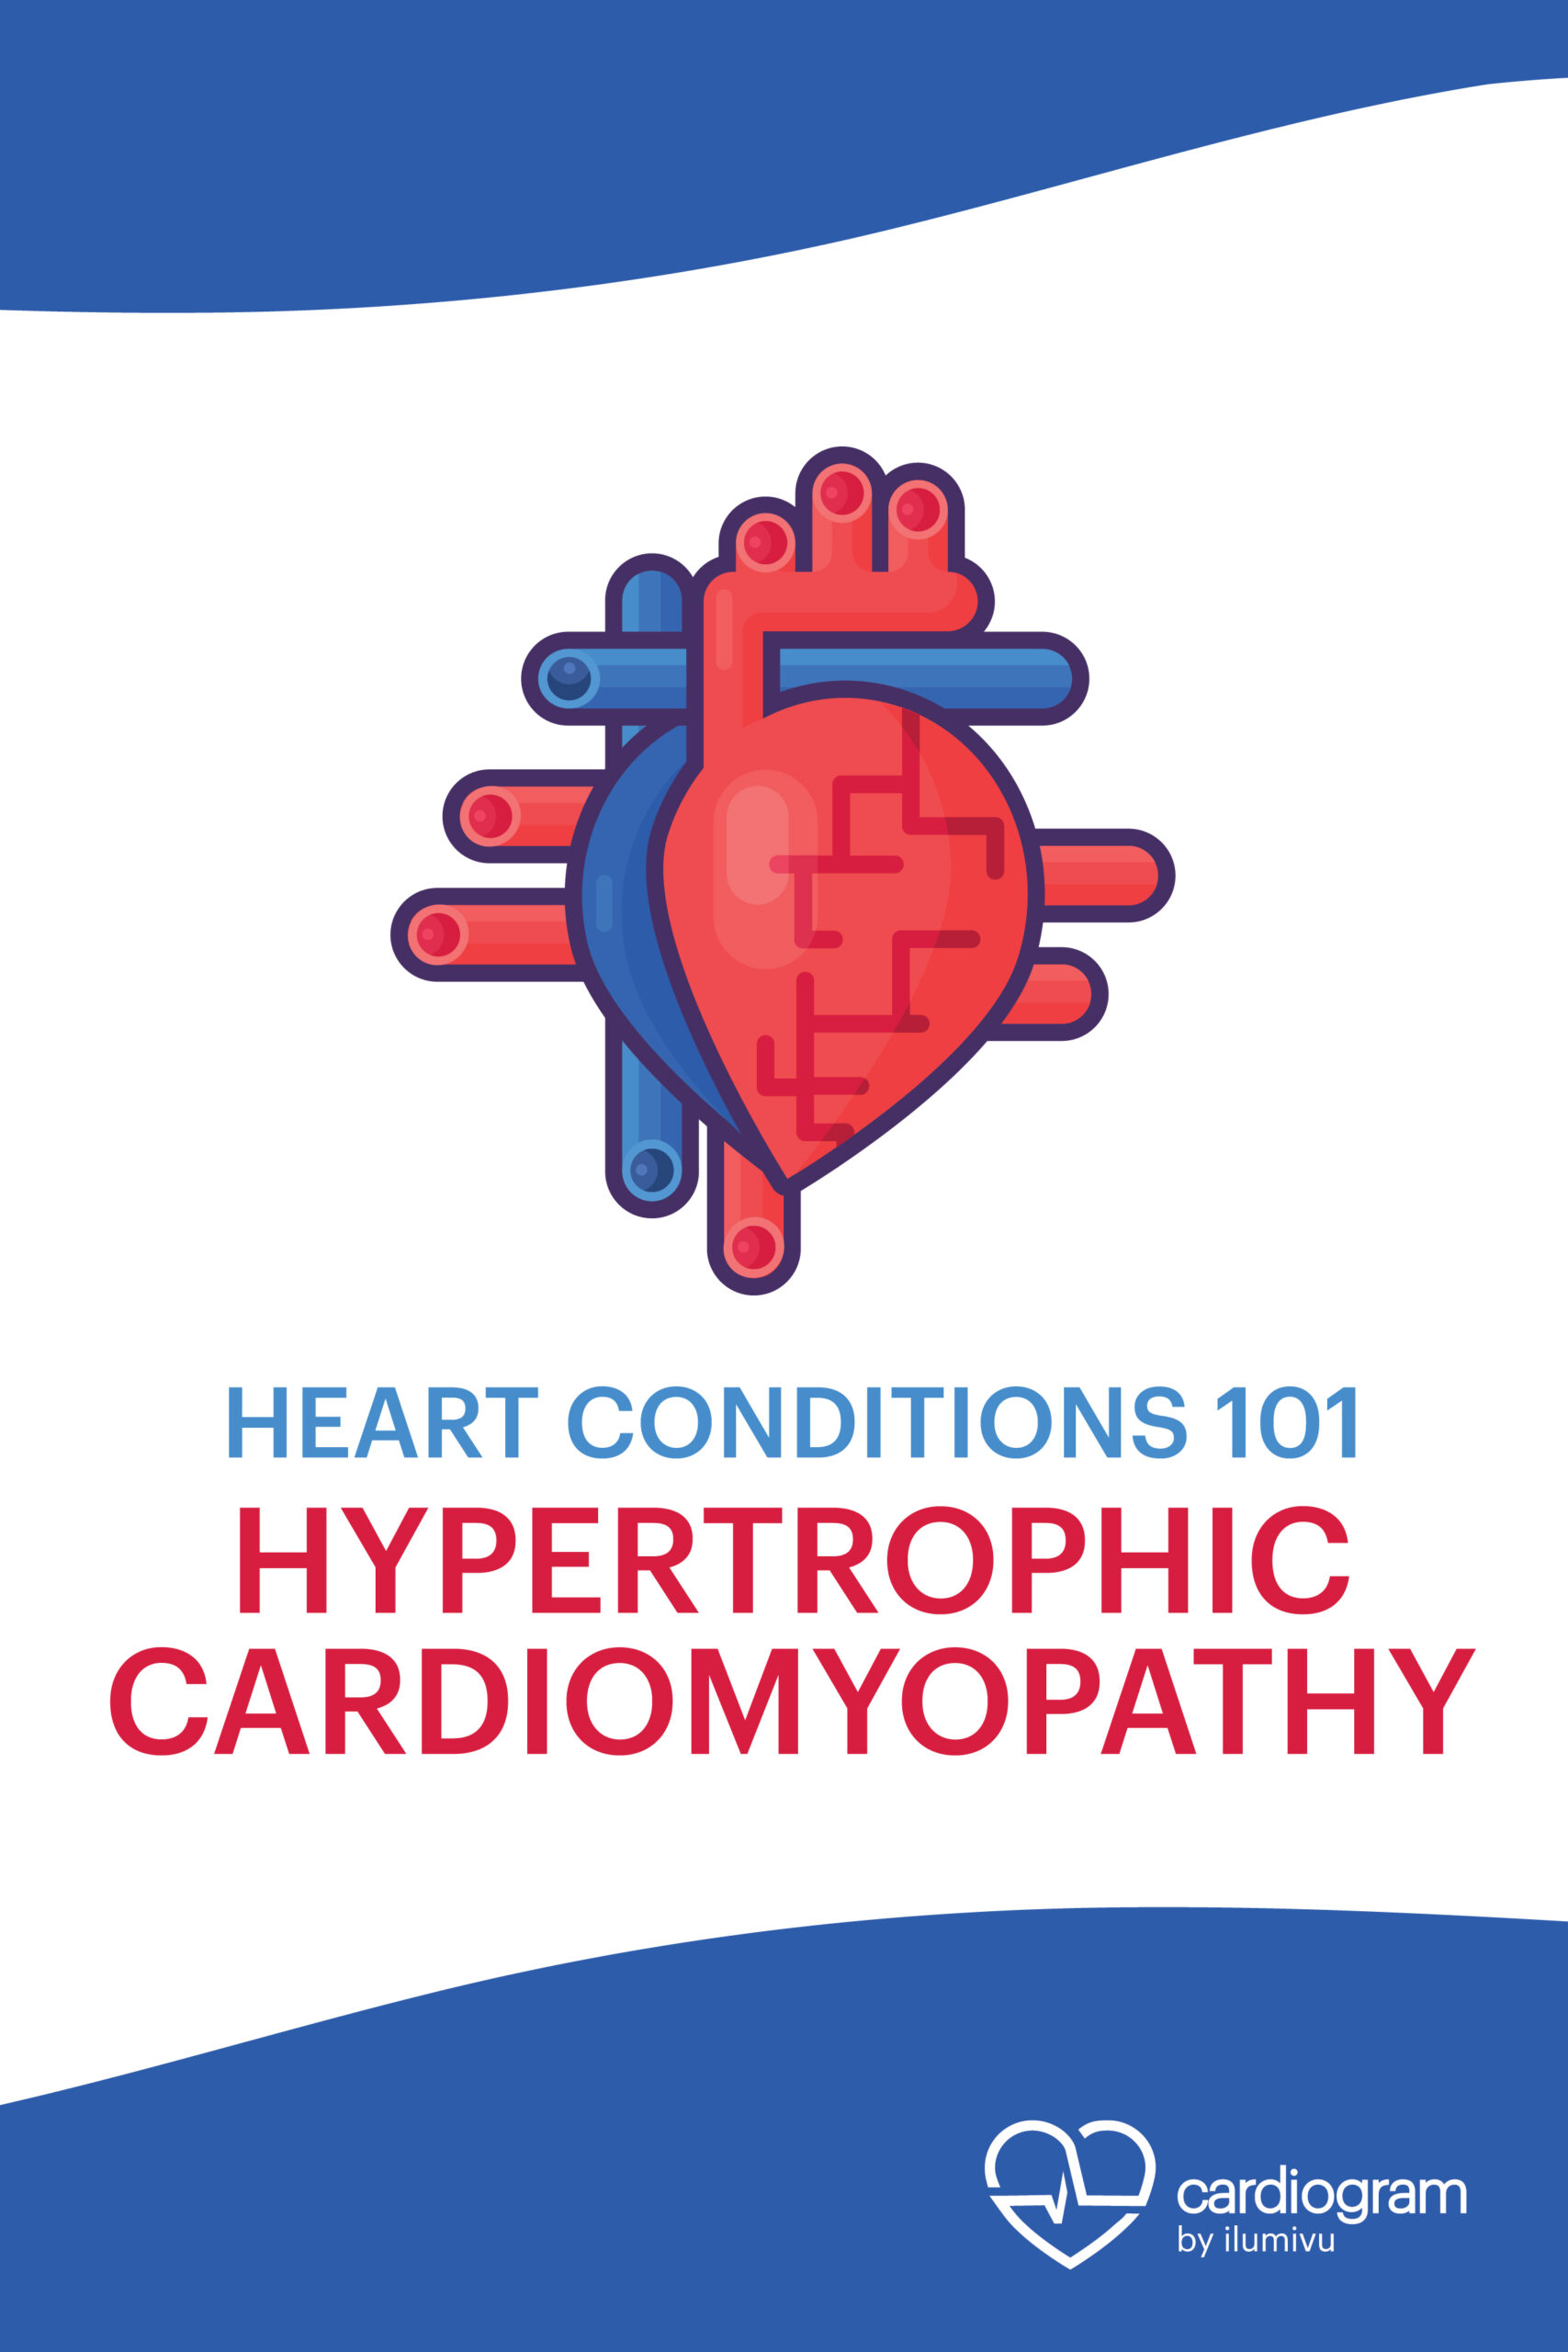 Heart Conditions 101: Hypertrophic Cardiomyopathy